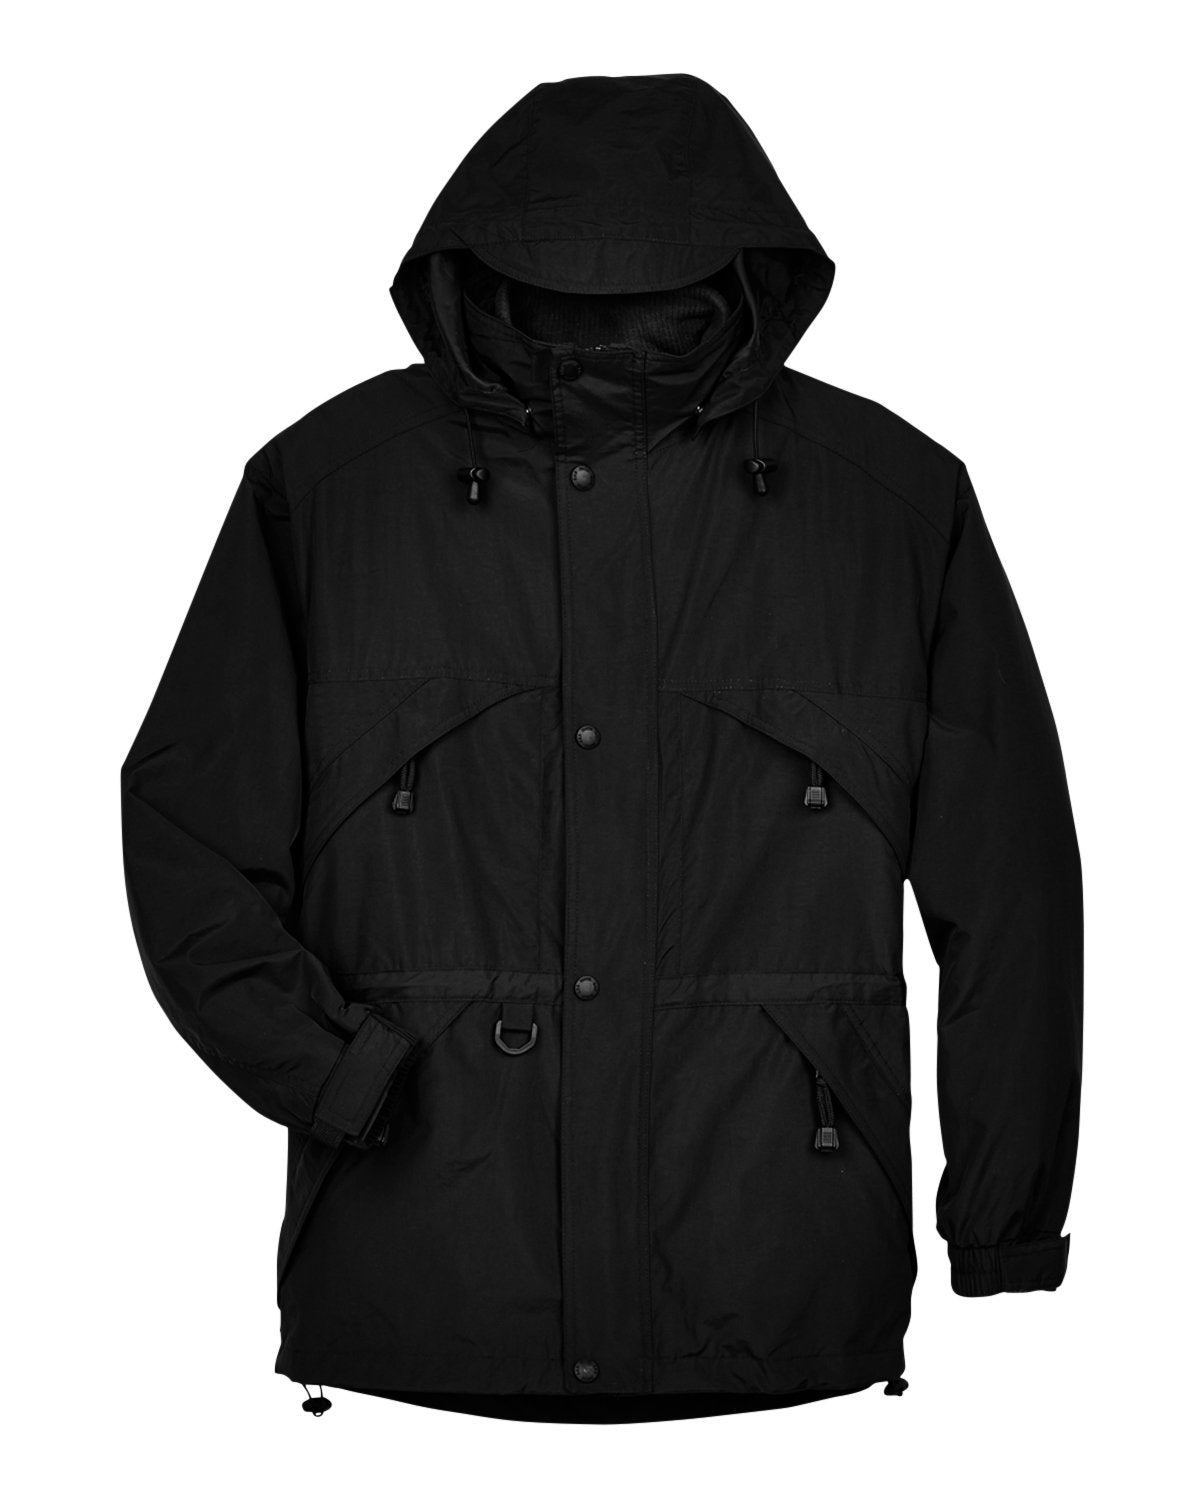 Winter Special Adult 3-in-1 Parka with Dobby Trim